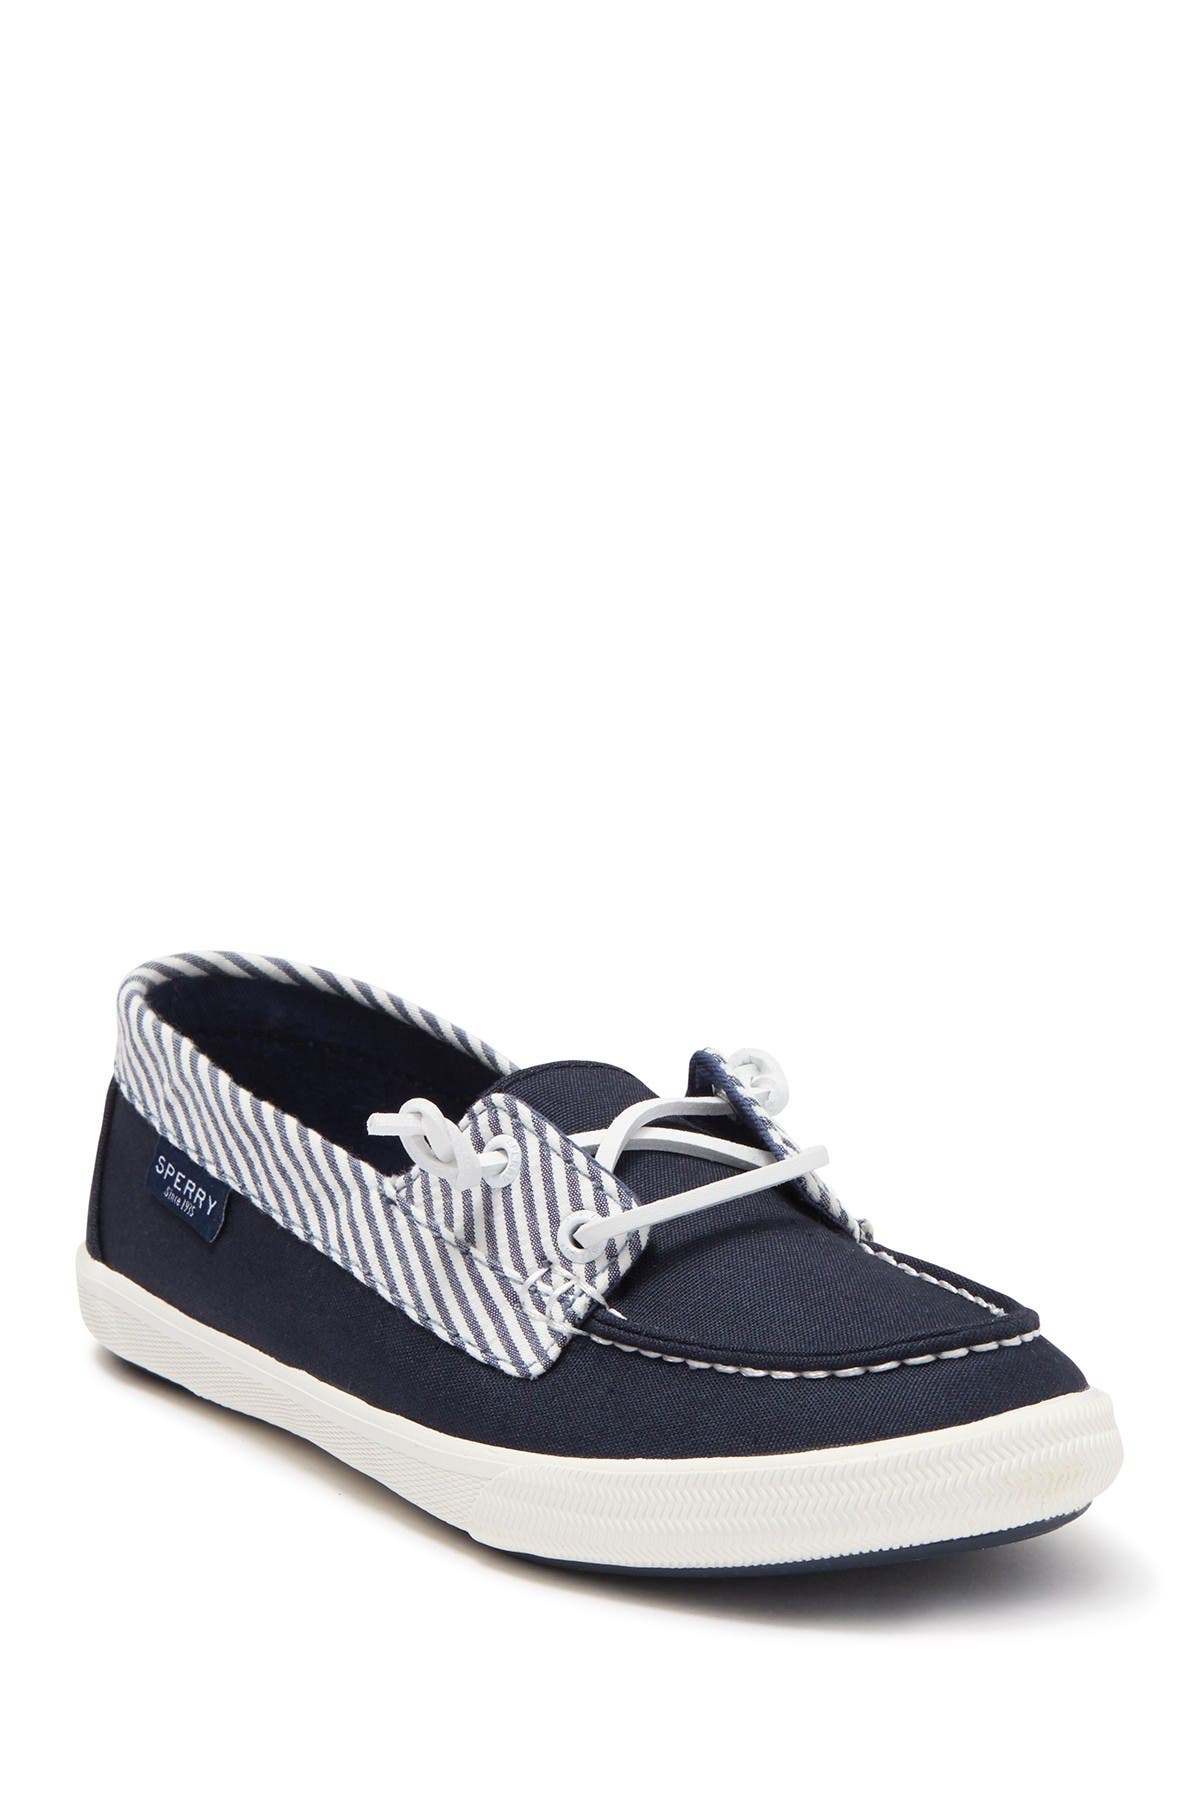 lounge away sperry